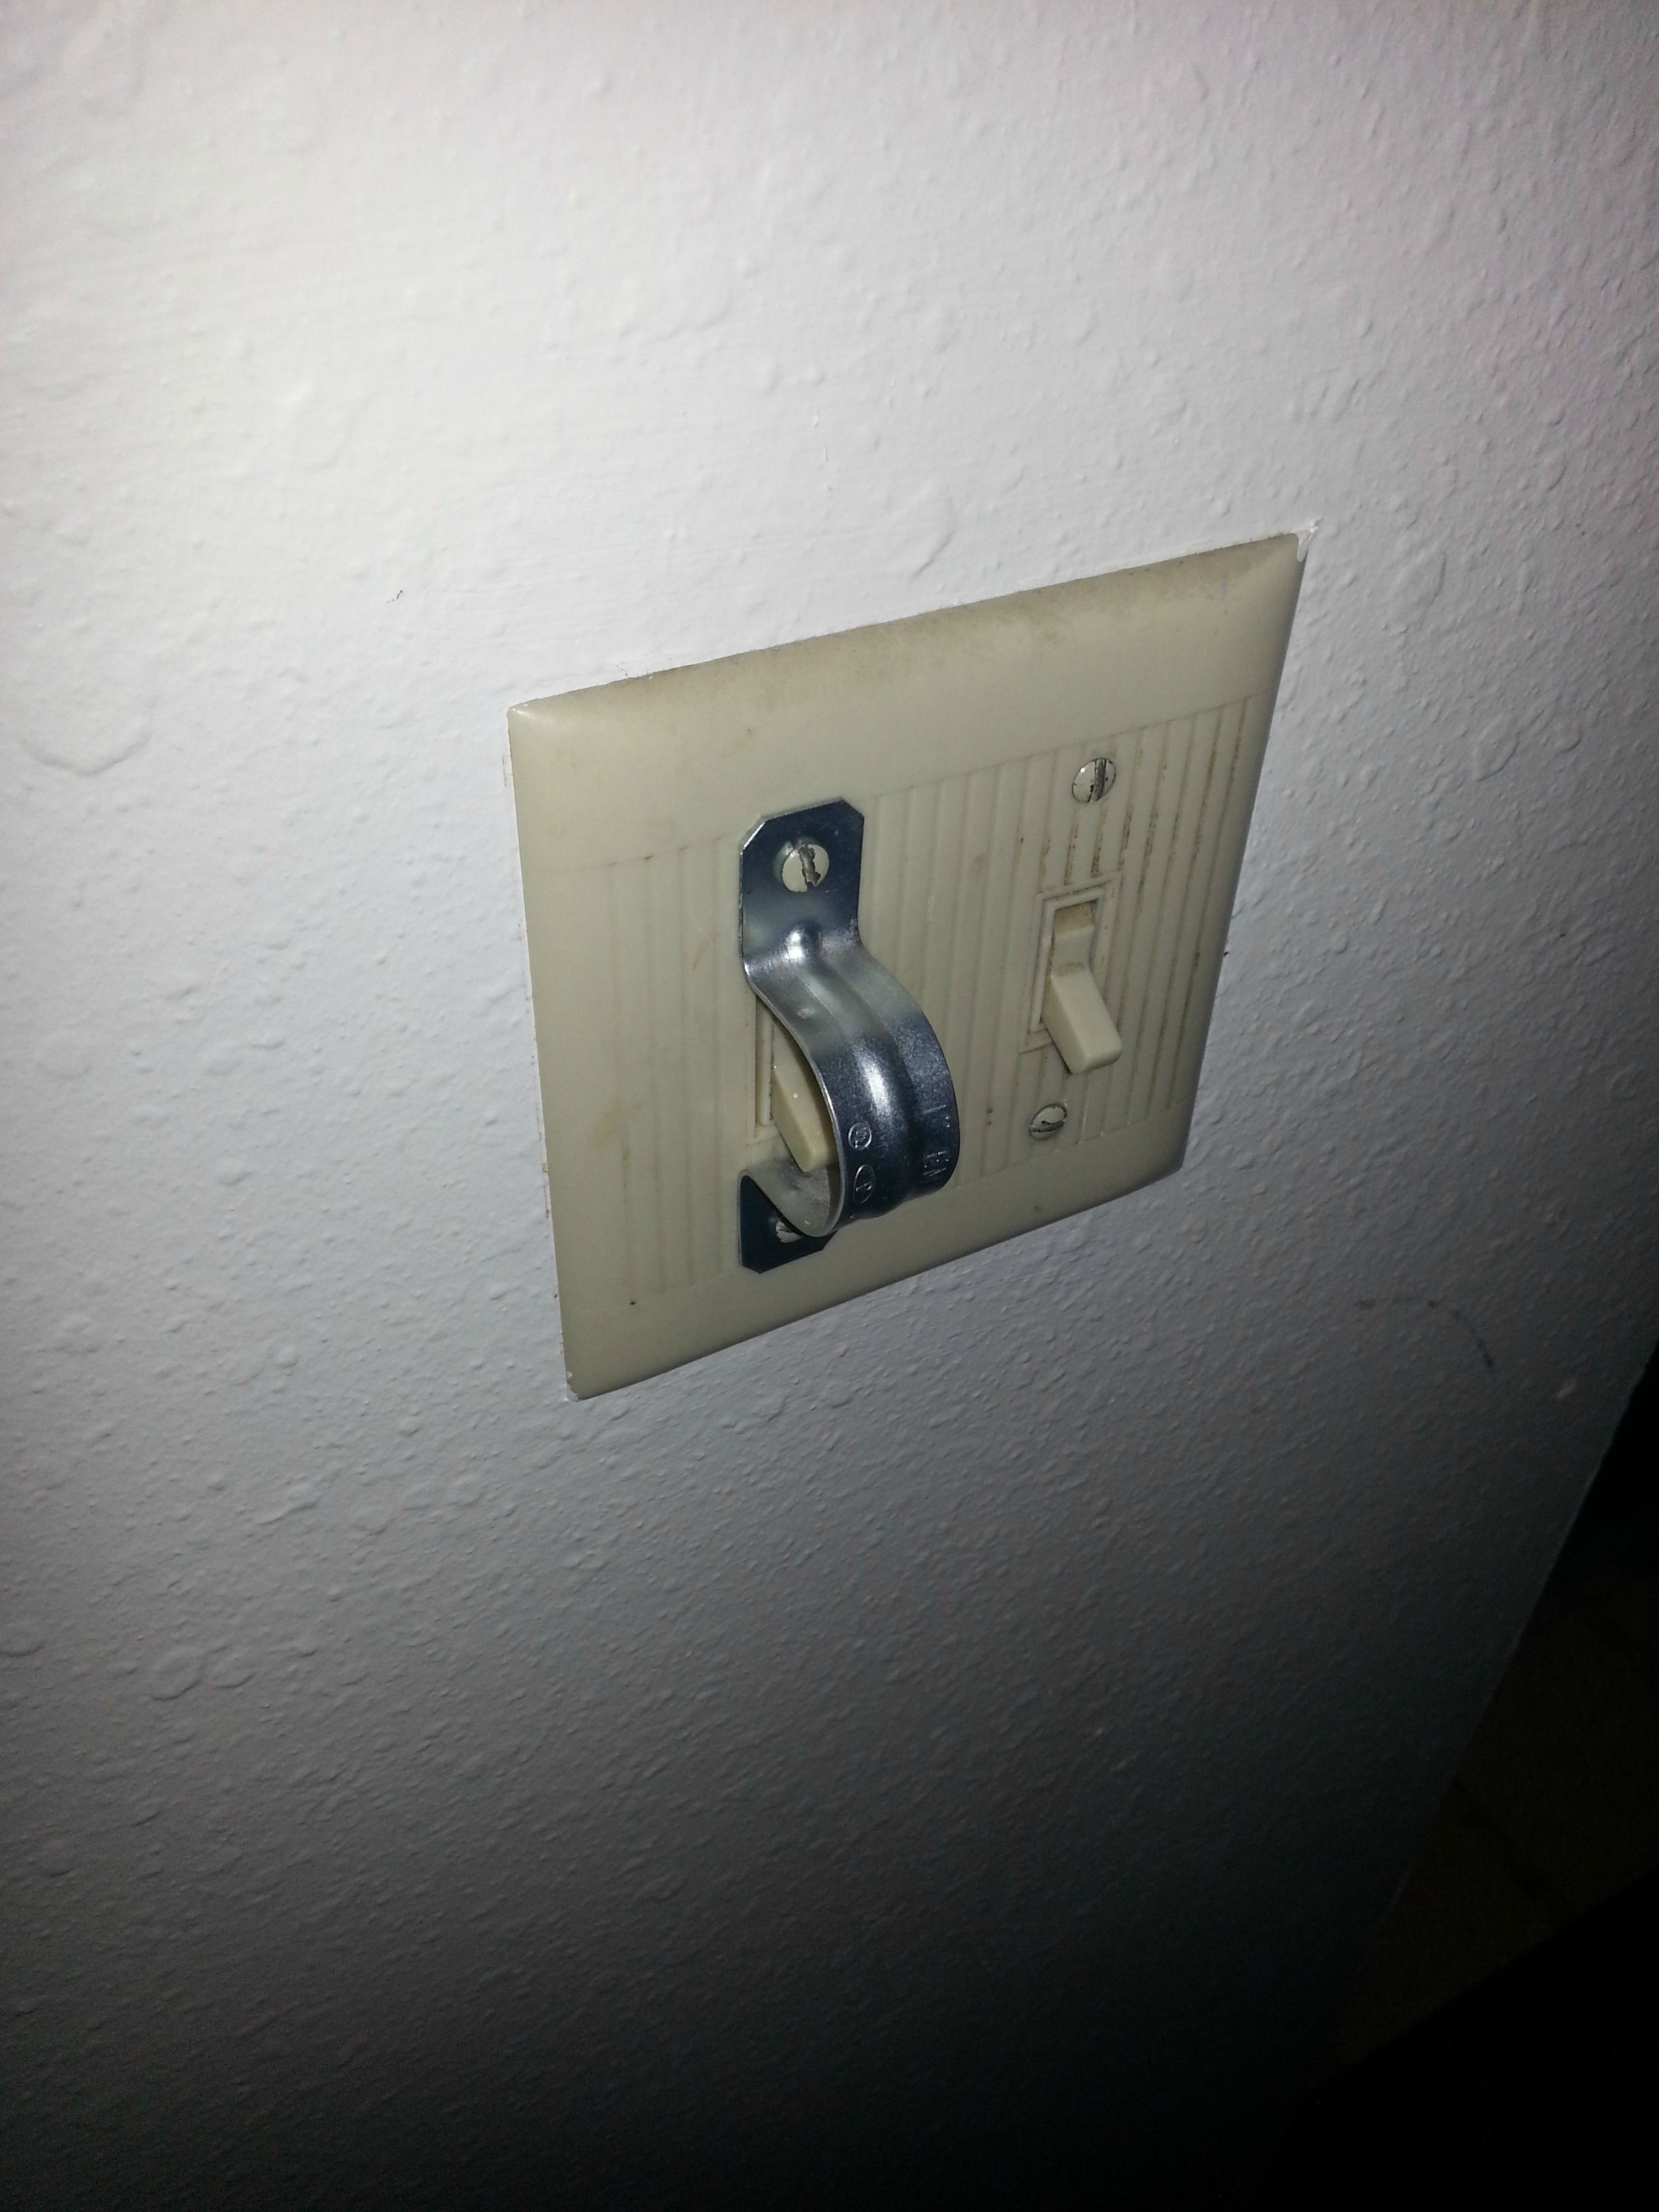 Keeping a Permanent Switch in the Right Position